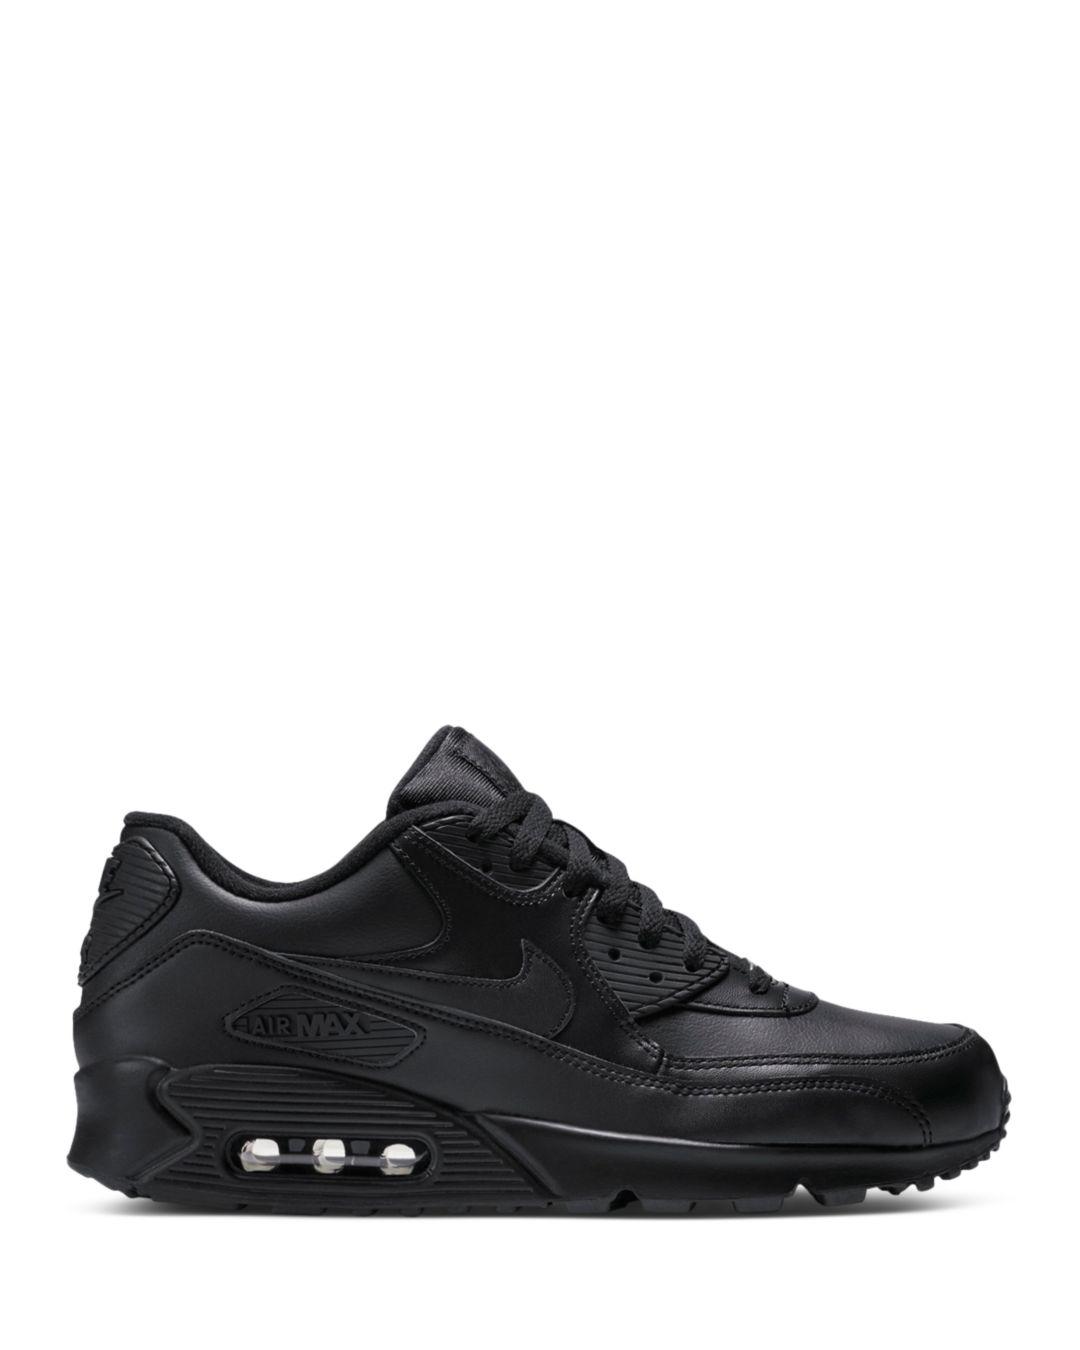 Nike Leather Air Max 90 Shoes in Black/Black (Black) for Men - Save 55% -  Lyst